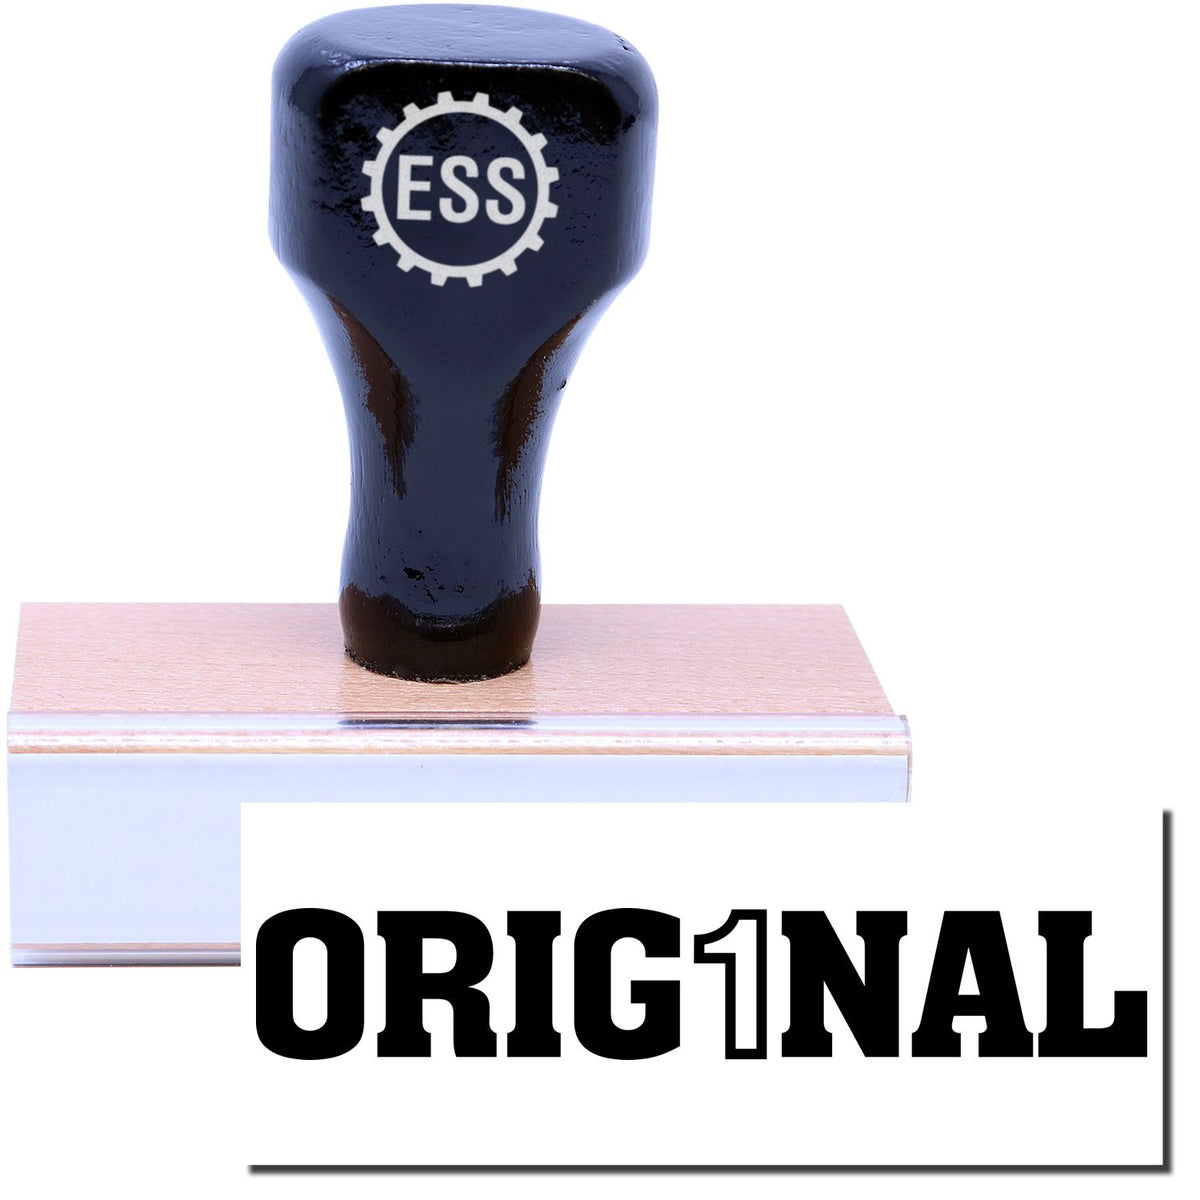 A stock office rubber stamp with a stamped image showing how the text &quot;ORIG1NAL&quot; in a large font is displayed after stamping.